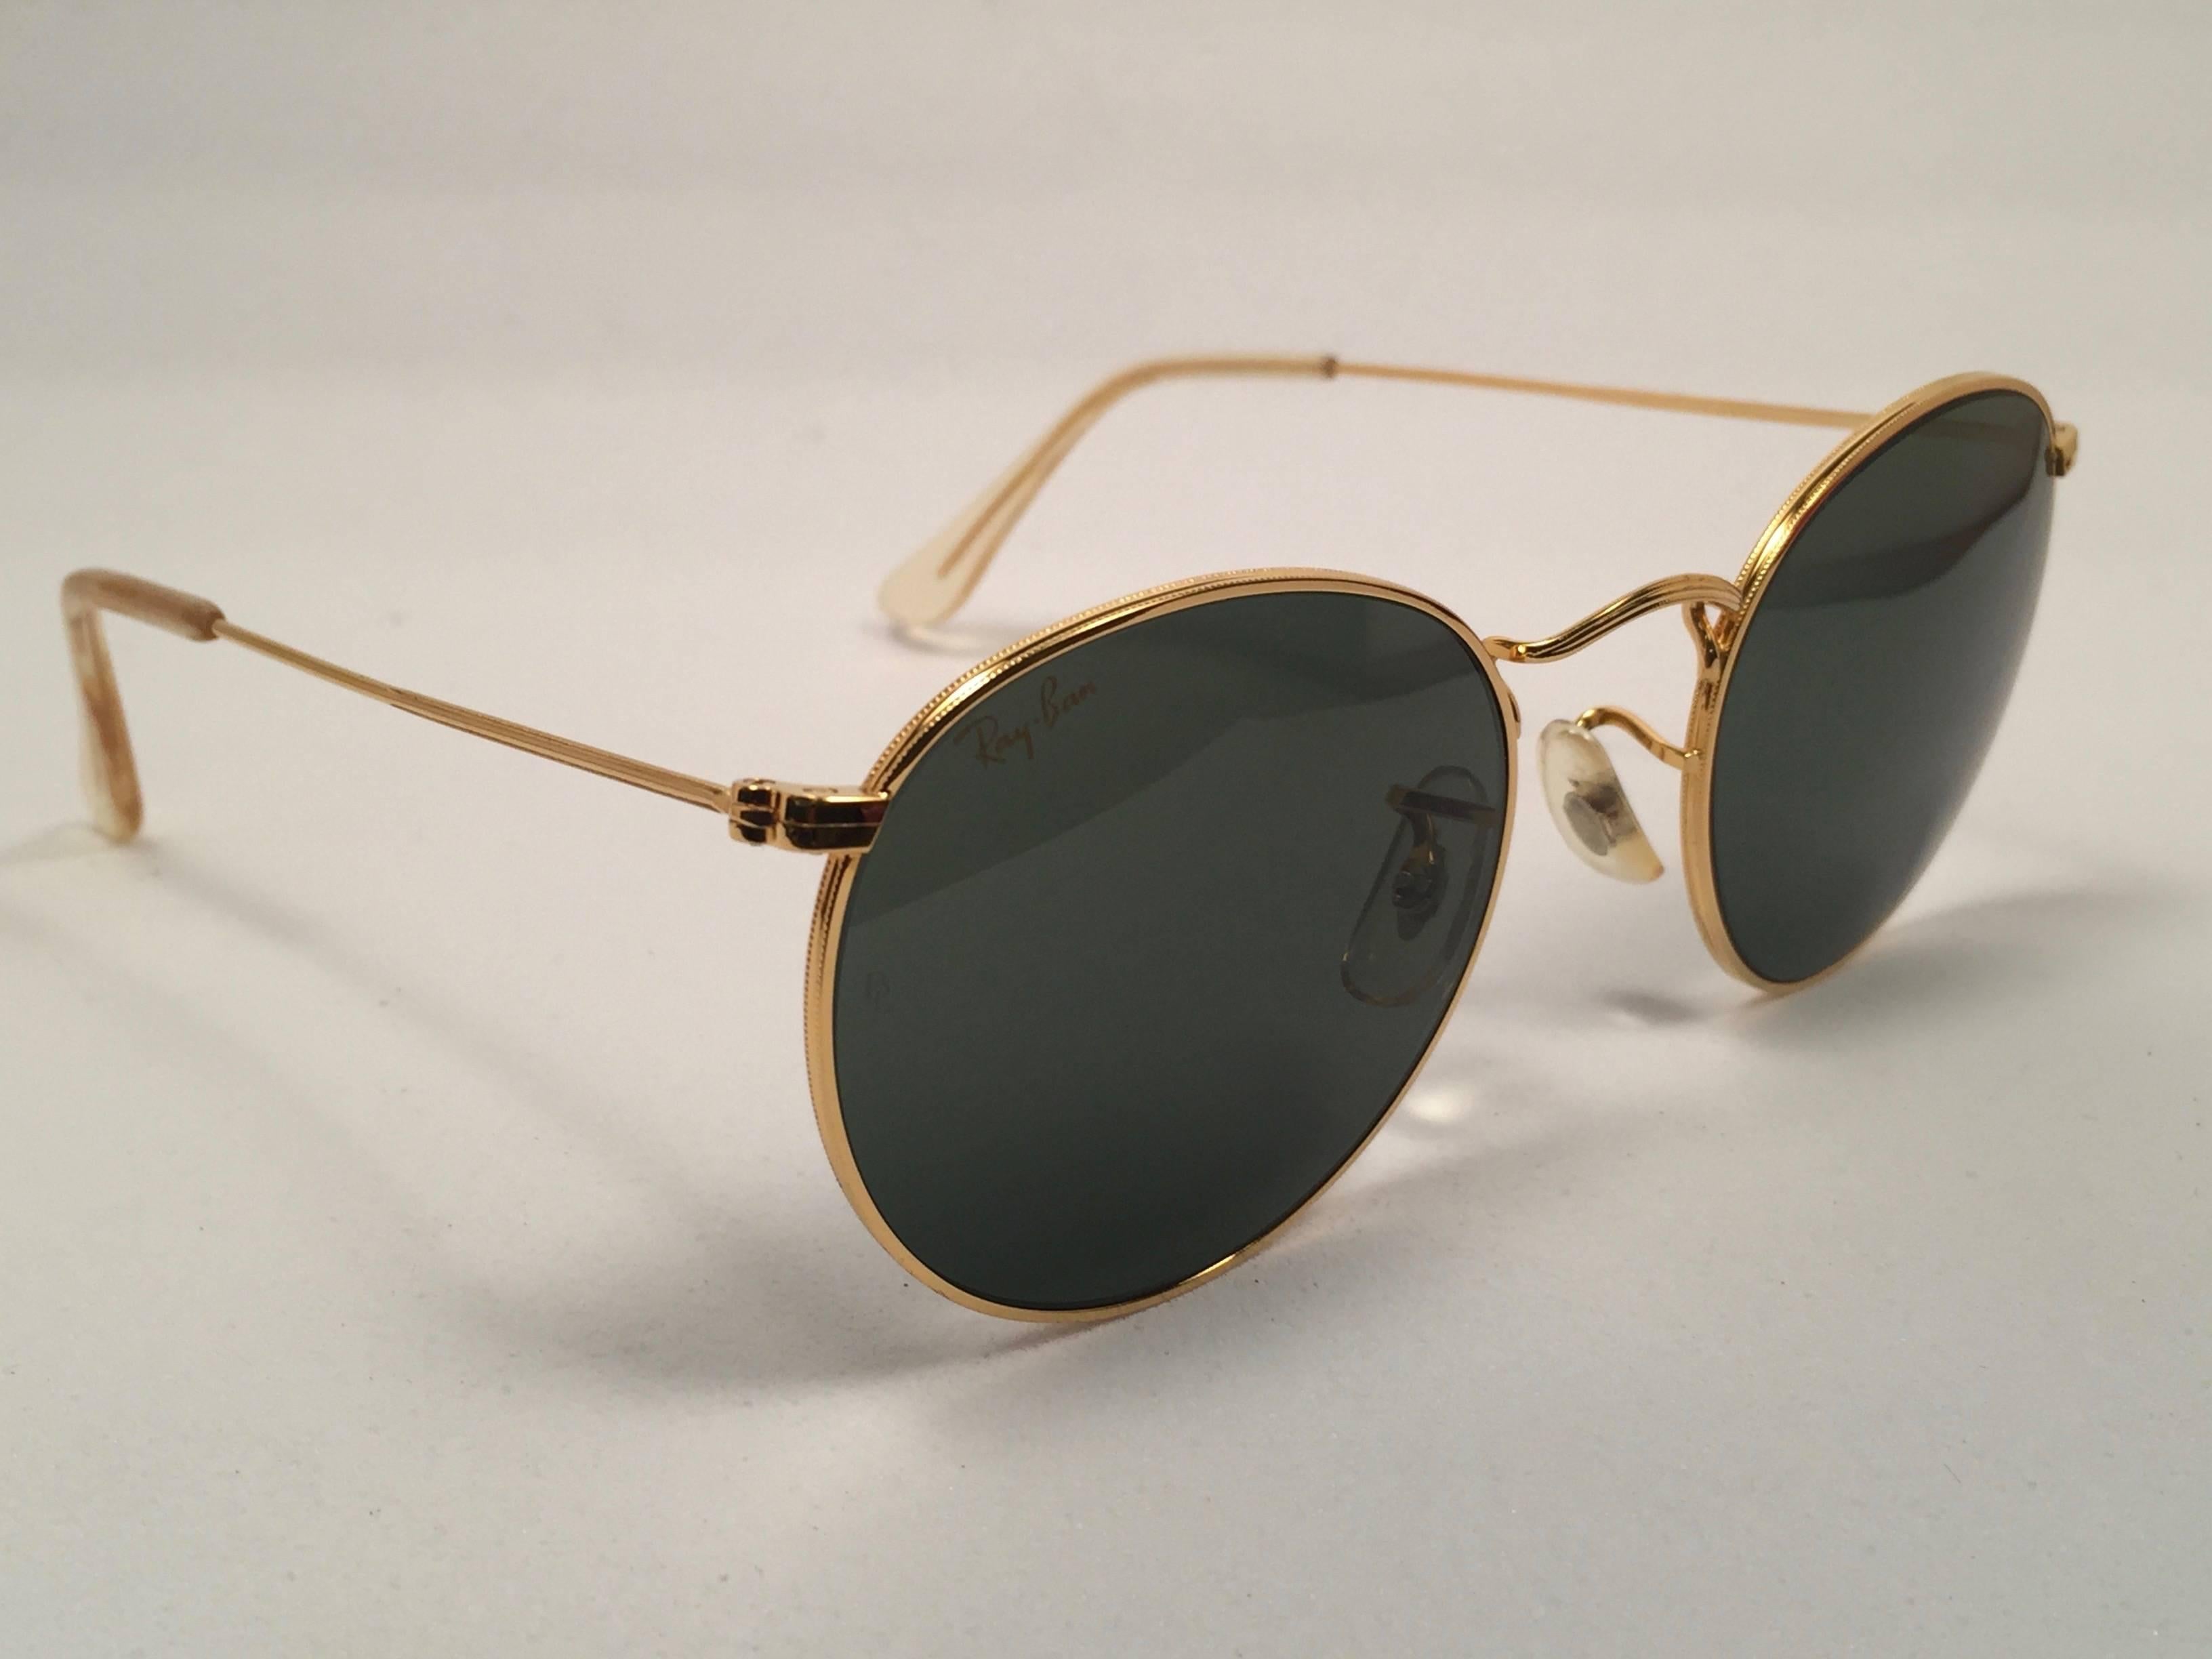 New Vintage Ray Ban classic round frame sporting G15 grey lenses.
Comes with its original Ray Ban B&L case with minor sign of wear due to storage.  
